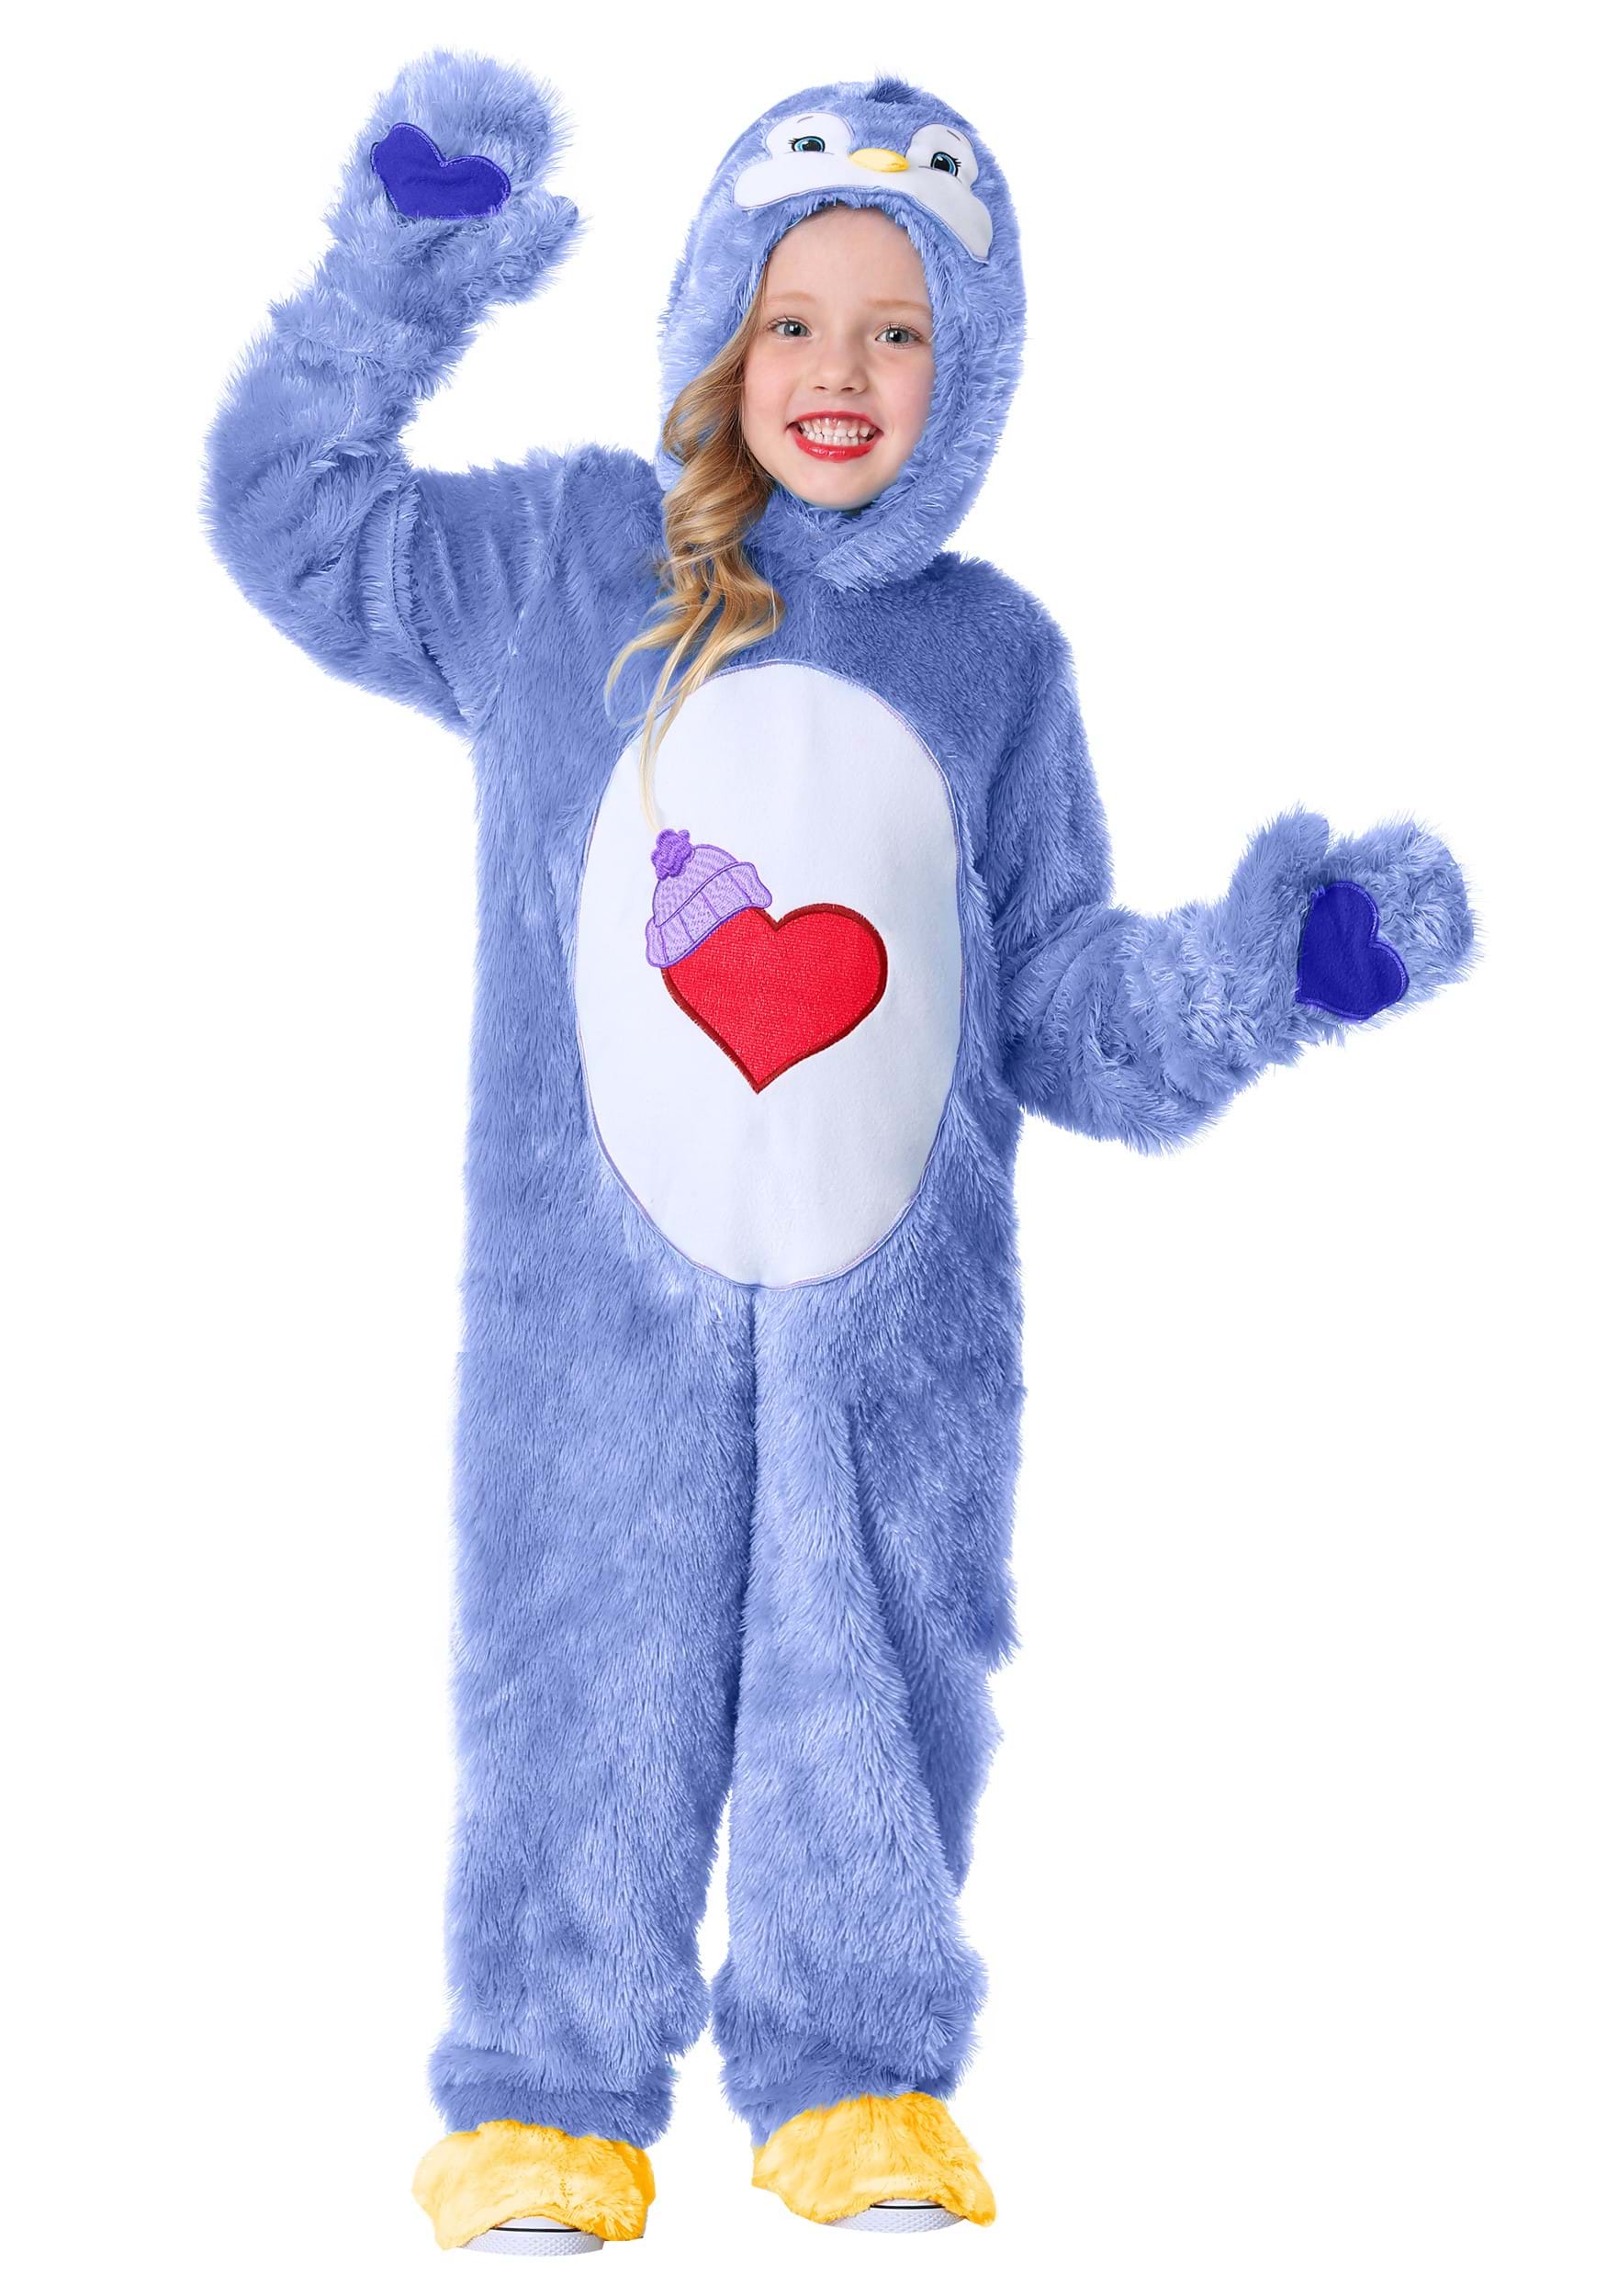 Photos - Fancy Dress CARE FUN Costumes  Bears & Cousins Cozy Heart Penguin Costume for Toddlers 